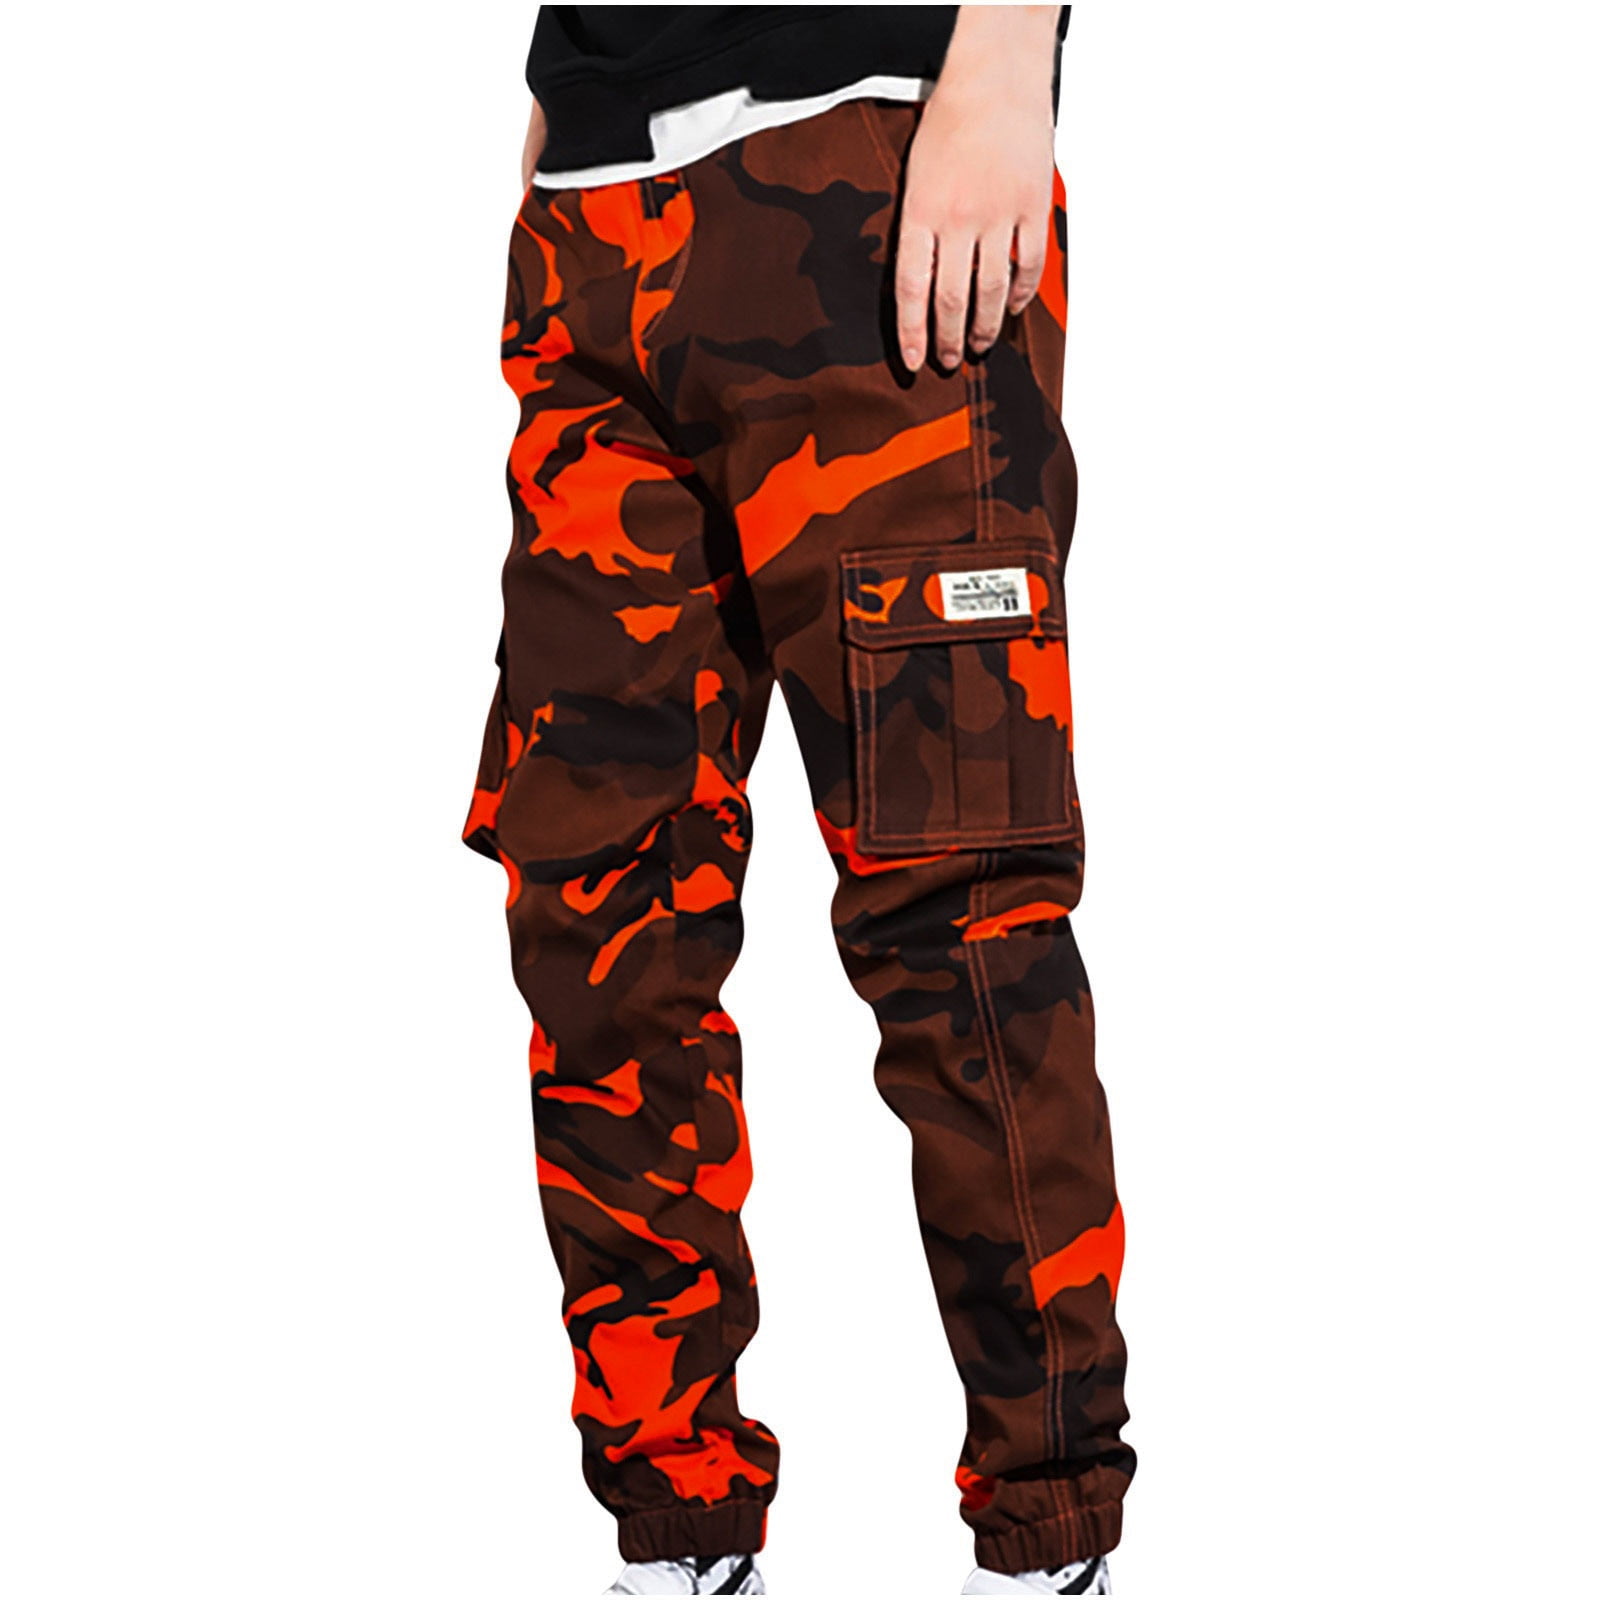 Top more than 147 black and red cargo pants - in.eteachers